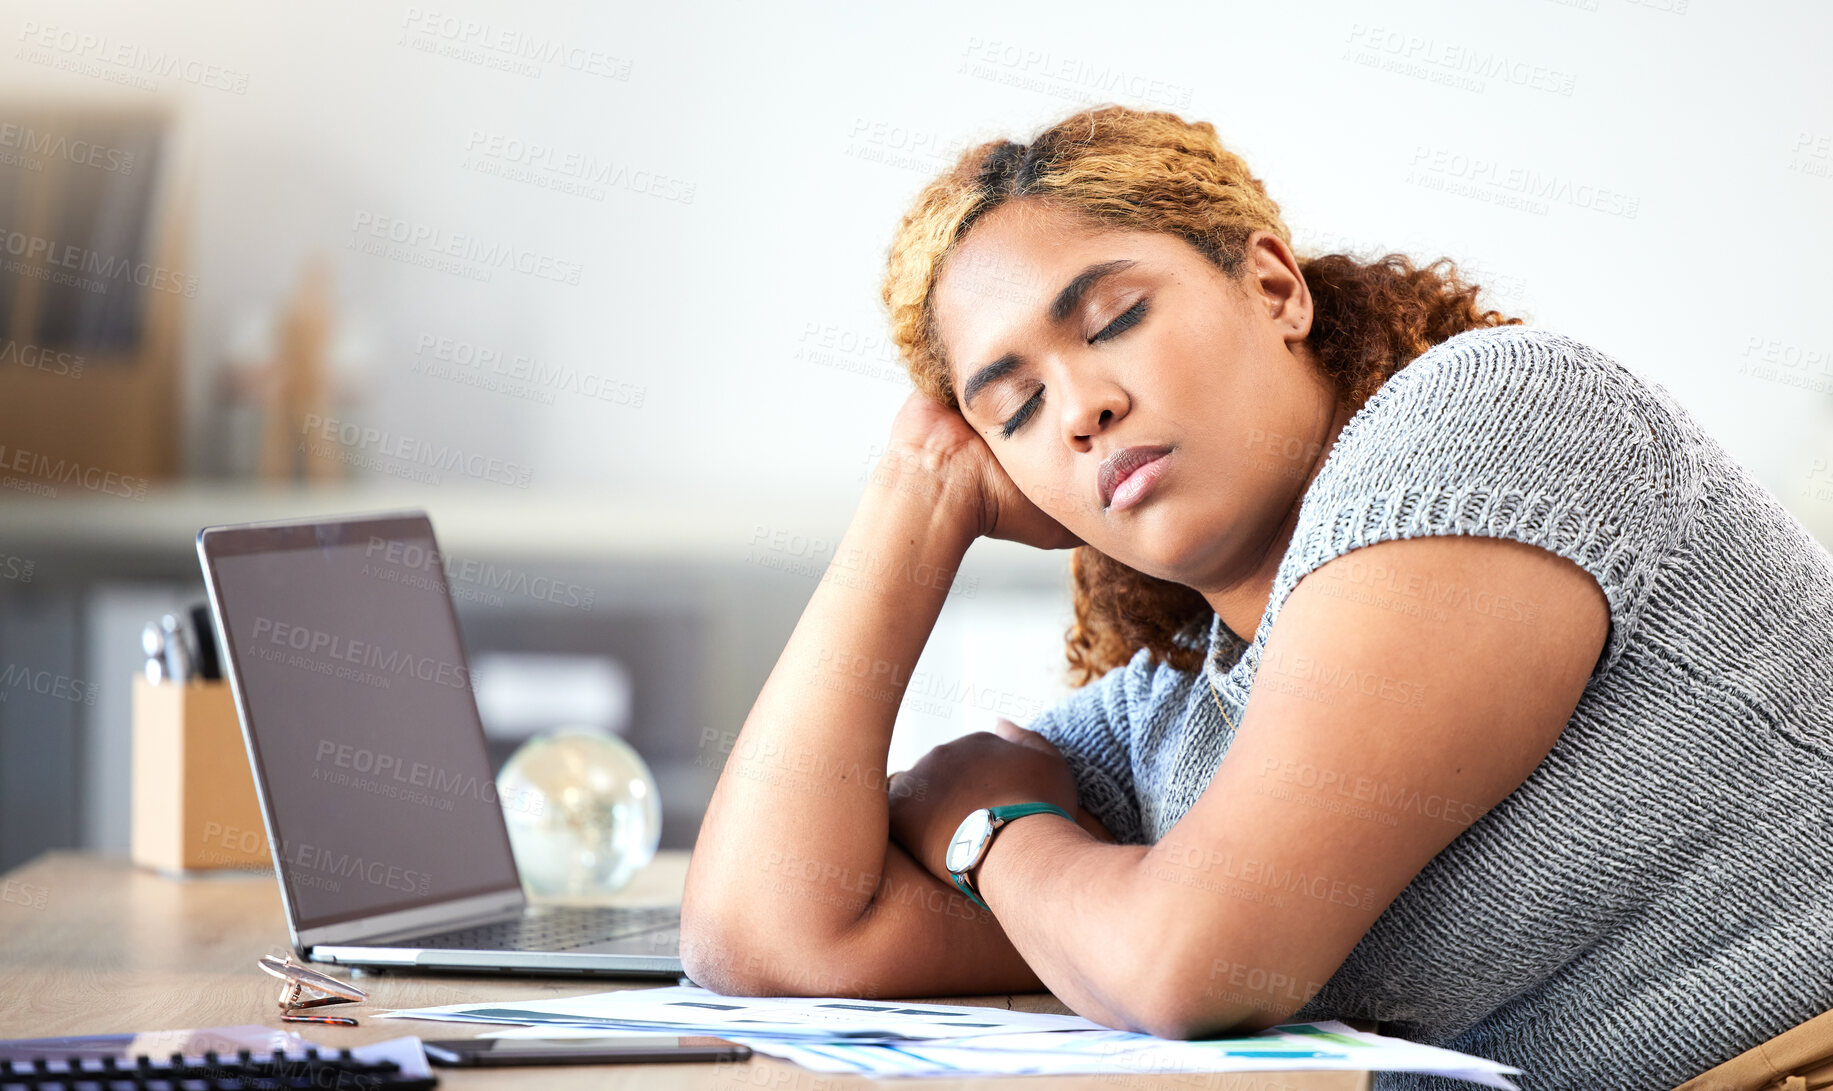 Buy stock photo Sleeping, desk and office worker burnout while working with laptop. Stress, fatigue and tired problem in your unhealthy workplace. Overworked, sleep and feeling anxious while you stay to do overtime